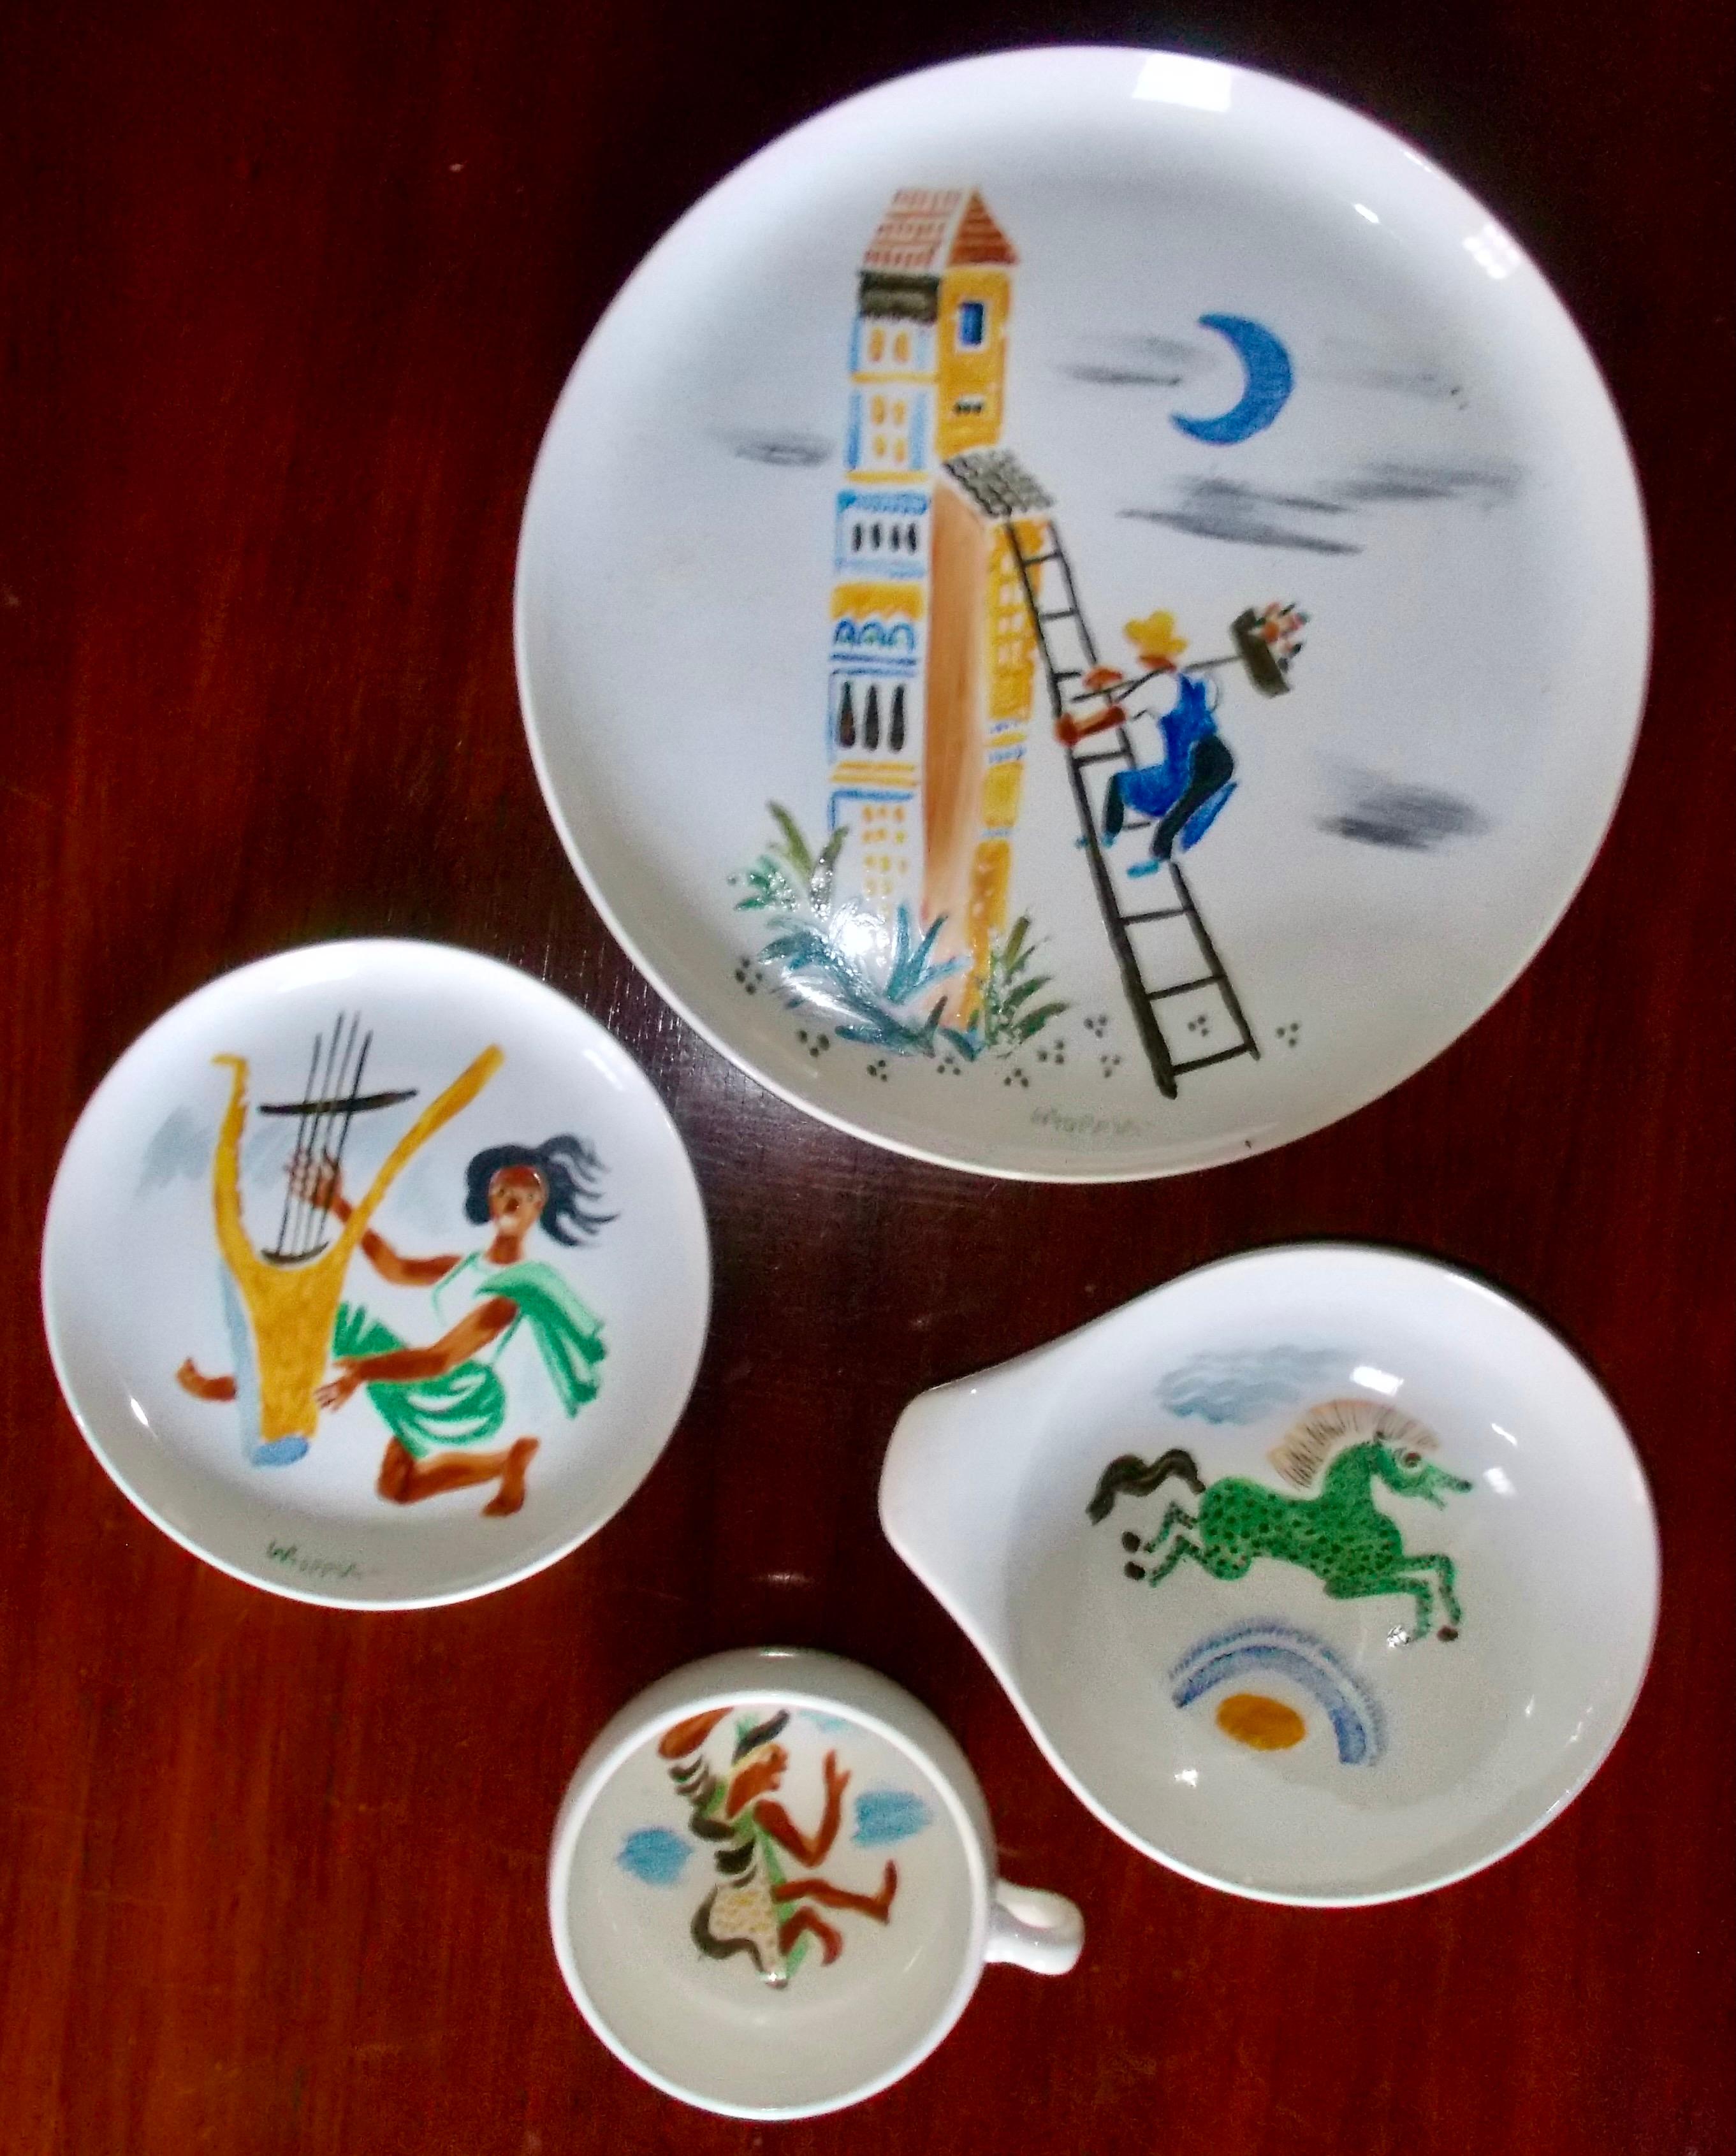 A set of four: cup, saucer, dinner plate and bowl, with paintings of mythological subjects on each by William Gropper. Russel Wright's 